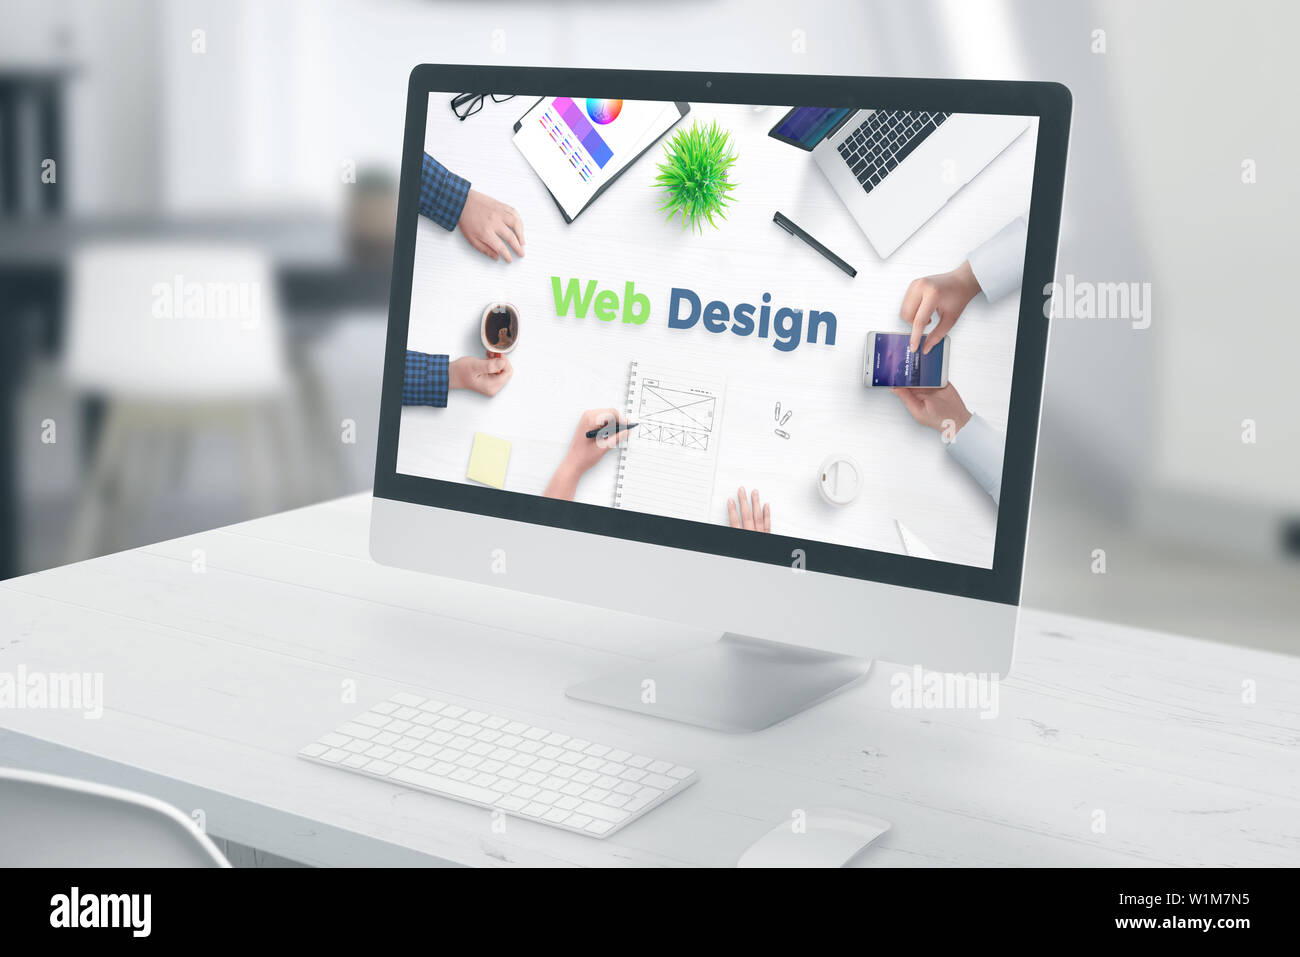 Computer display with web design text. concept of web design studio office. Stock Photo